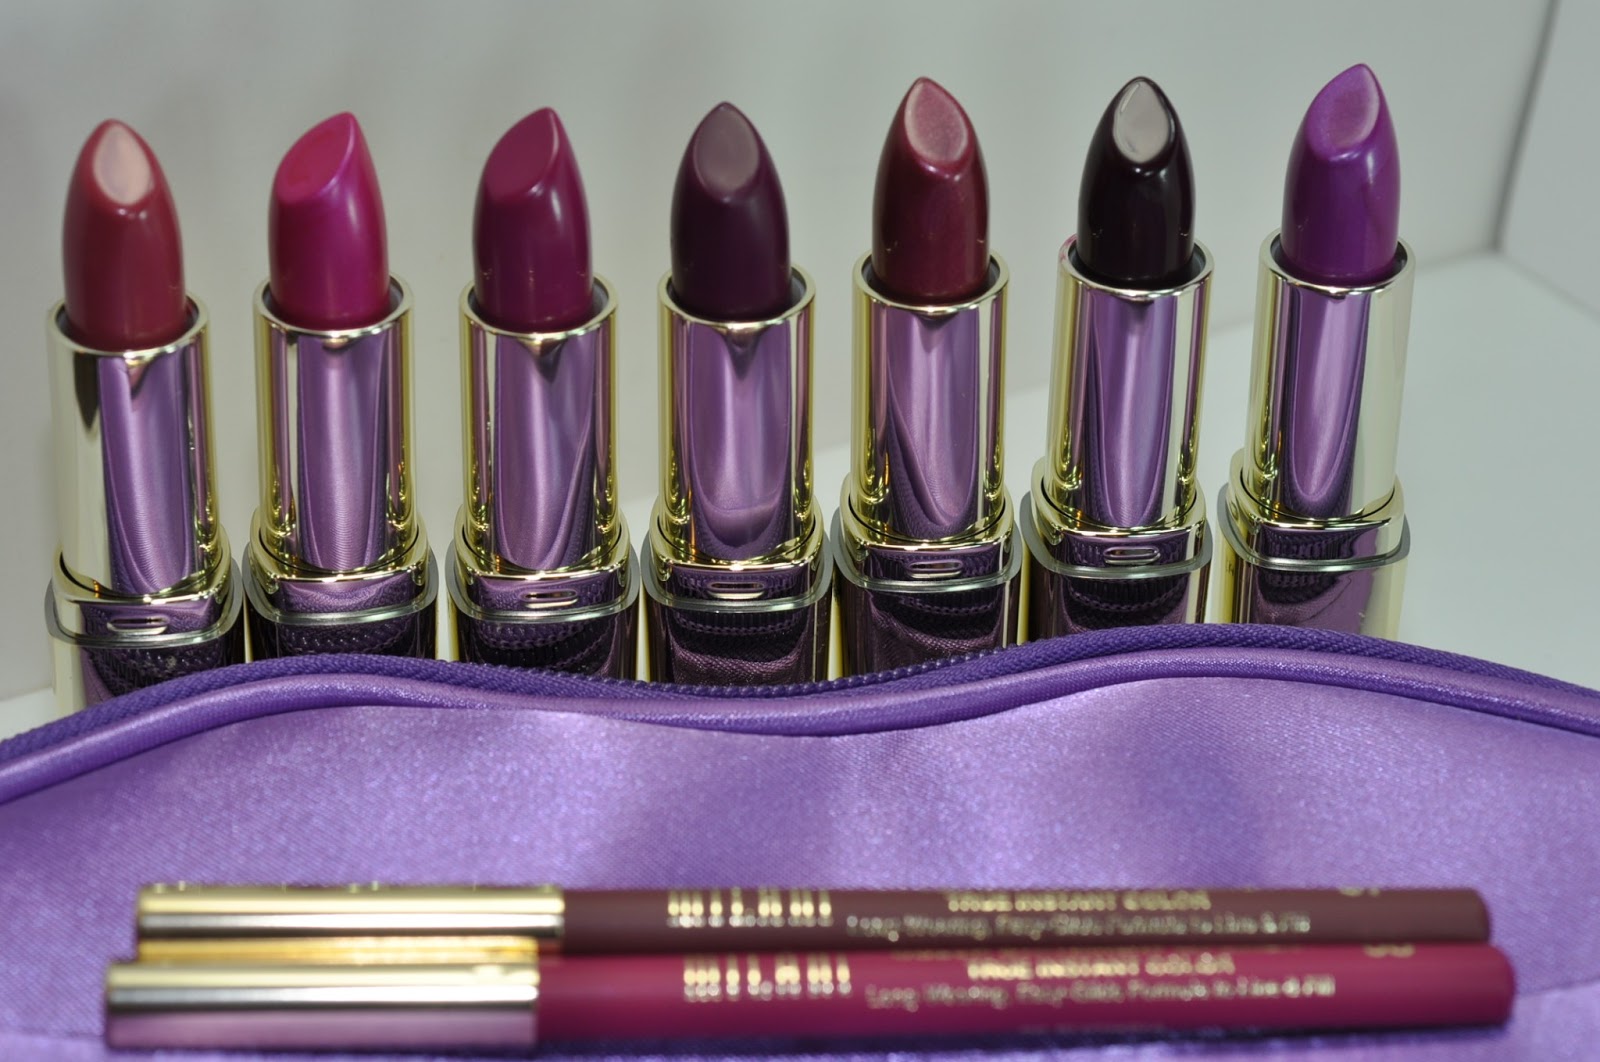 Milani Color Statement Lipsticks: Plums and Berries Swatches and